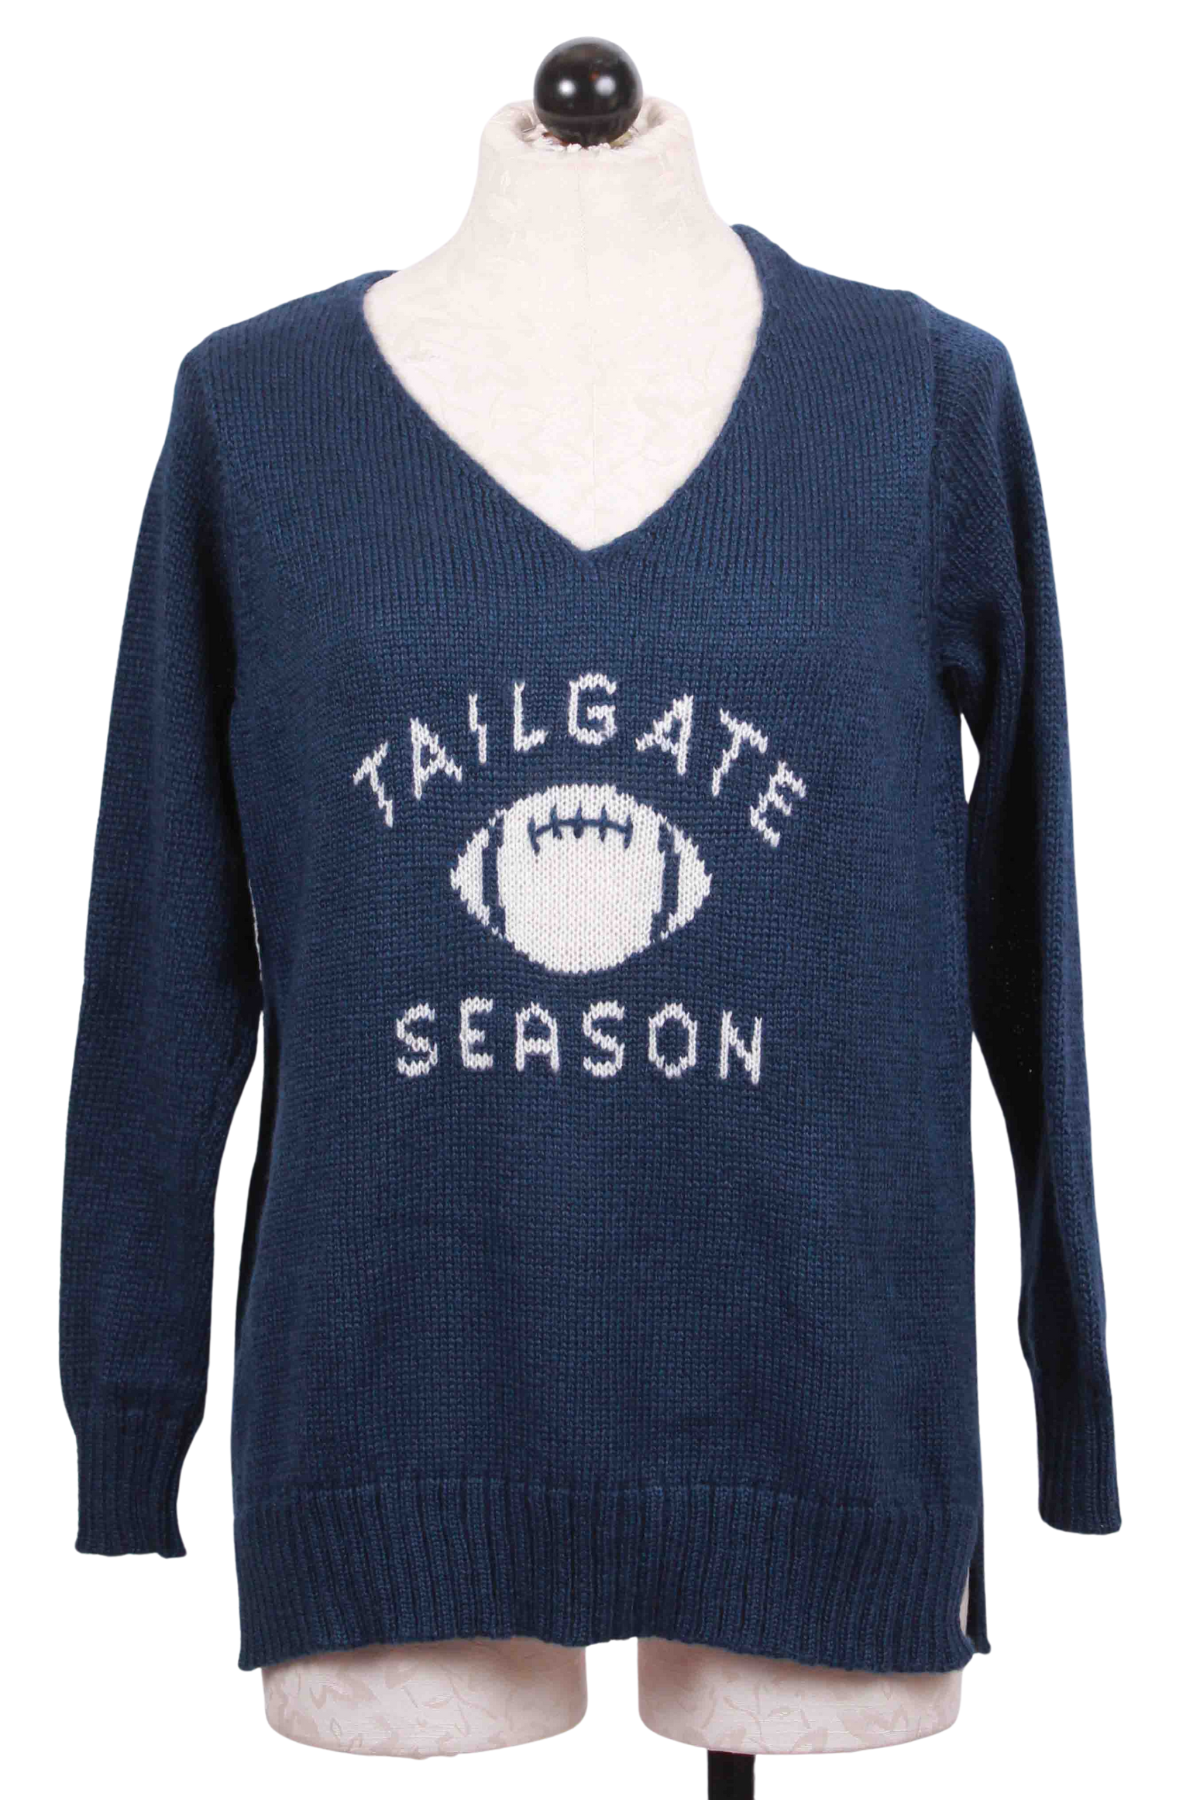 Highline Blue/Pure Snow V Neck Tailgate Season Sweater by Wooden Ships